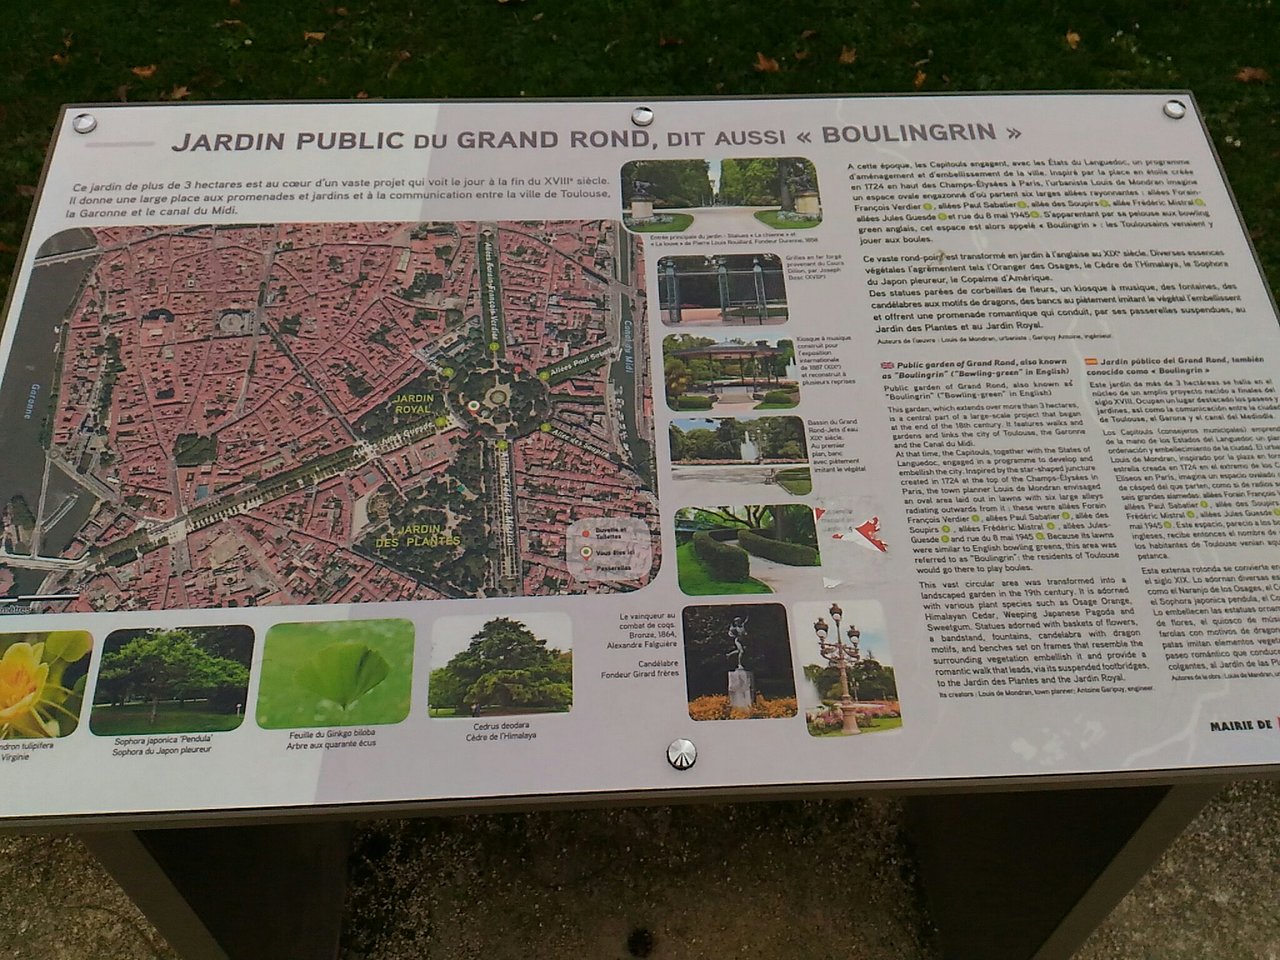 Jardin Niel toulouse Nouveau Jardin Du Grand Rond toulouse 2020 All You Need to Know